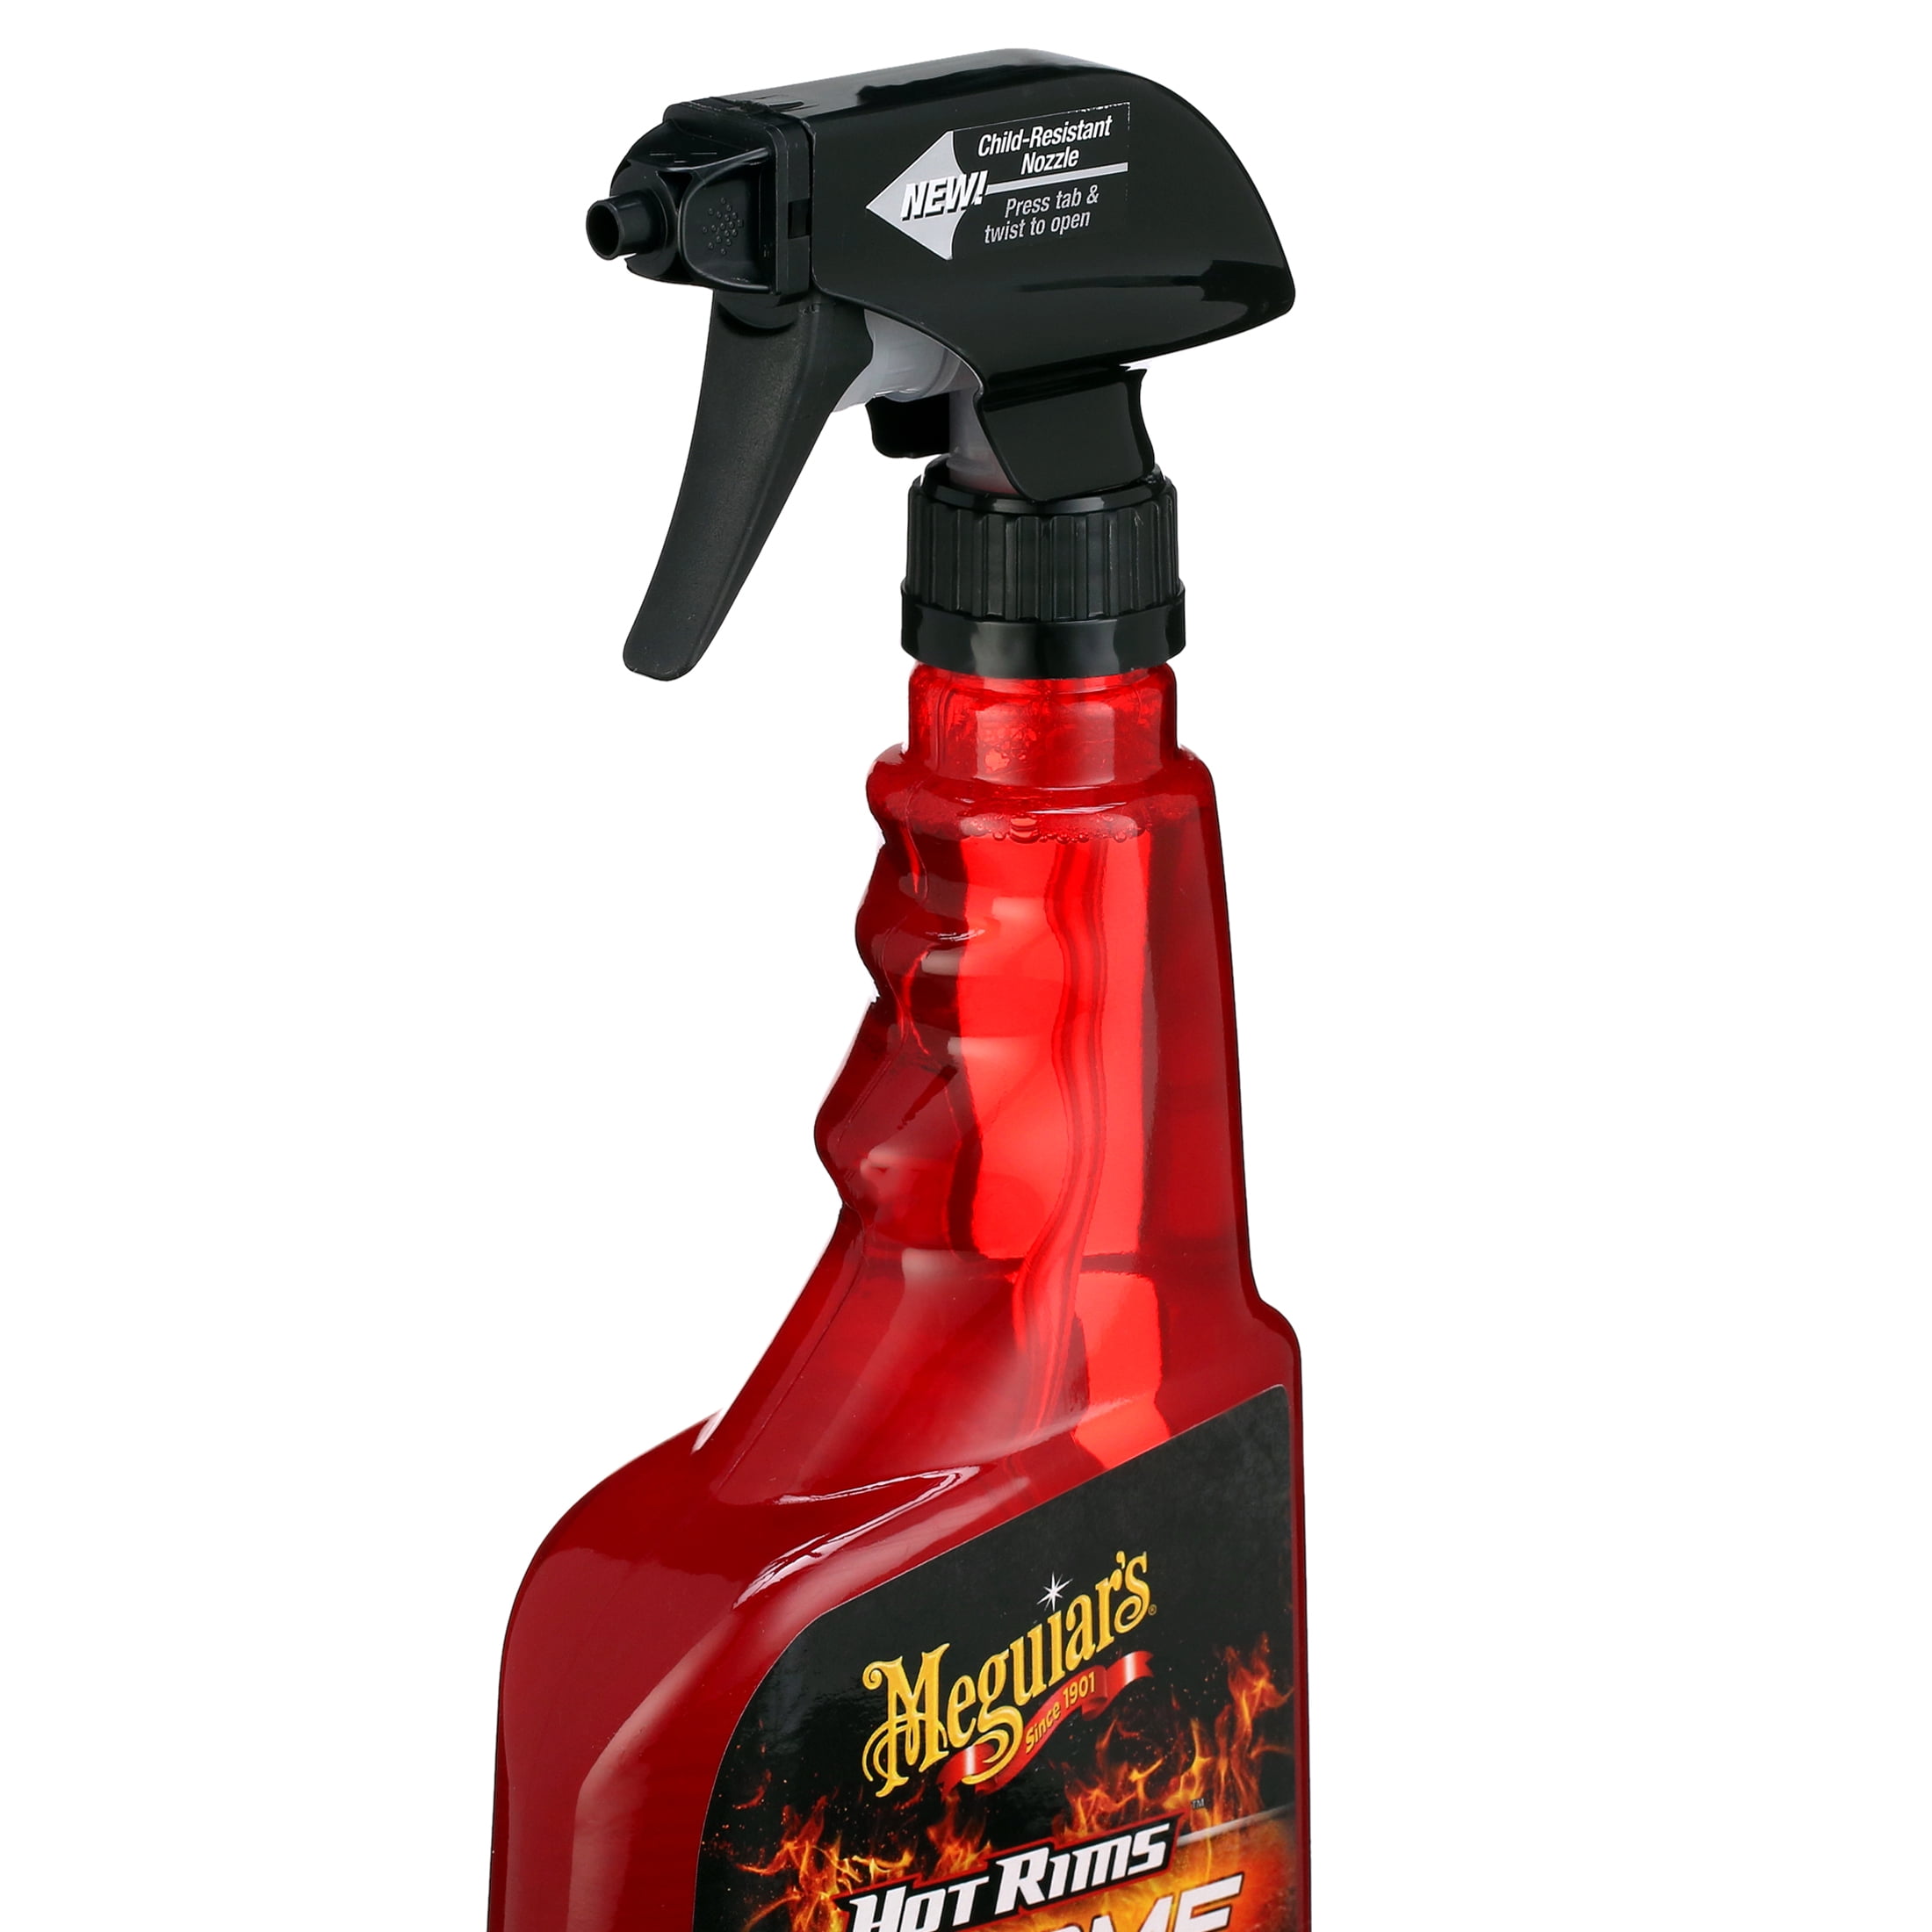 Meguiar's - We offer three different wheel cleaners in our consumer line,  but which one is right for you? Hot Rims Chrome Wheel Cleaner: This product  is suitable only for fully chromed